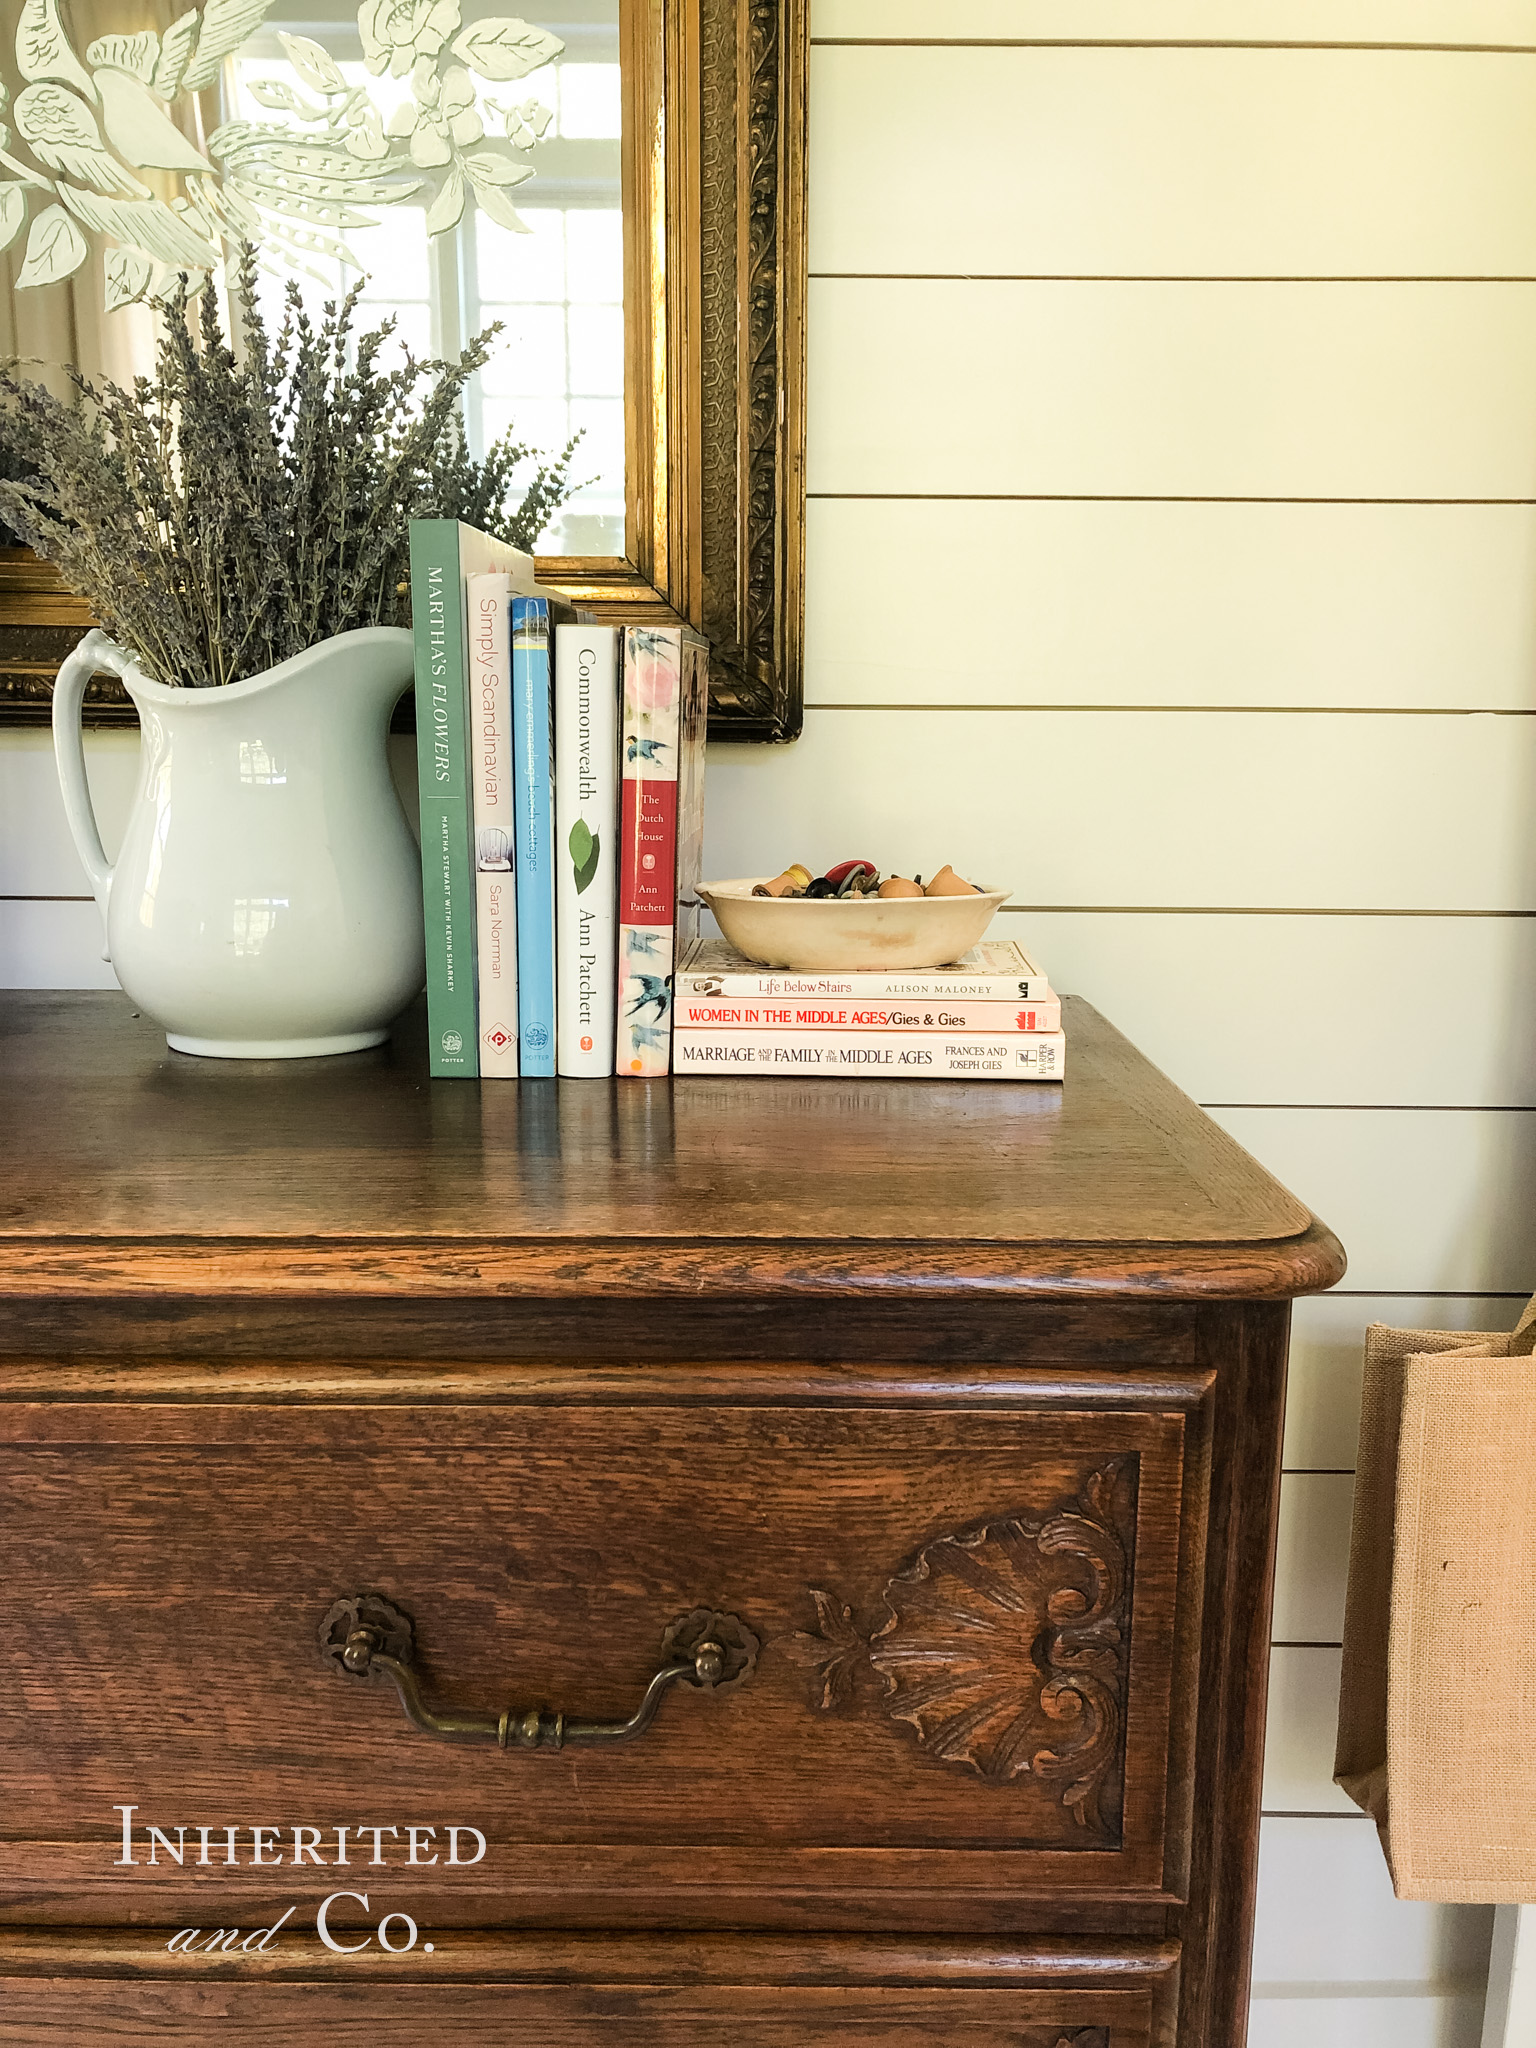 Ironstone and books from McKay's Used Bookstore Nashville atop an antique French dresser